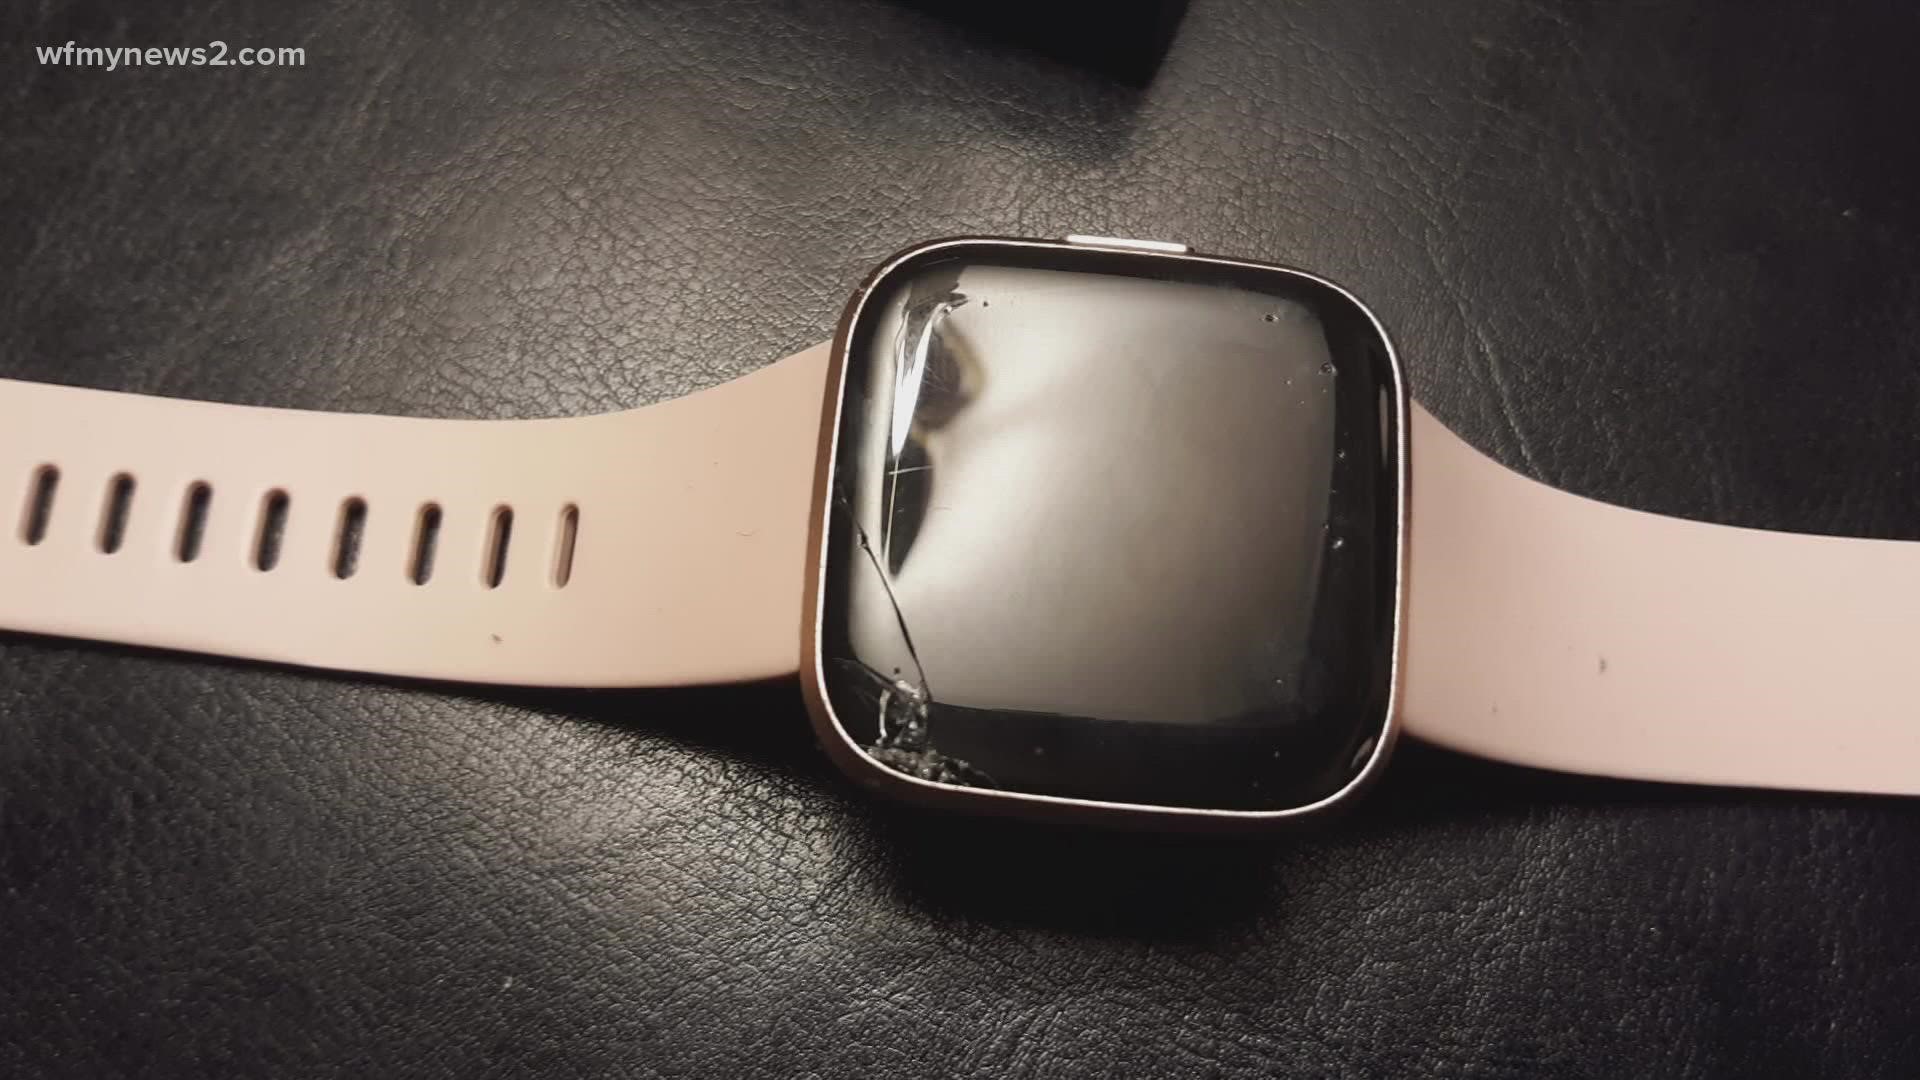 The smart watch broke. They bought a warranty, but the warranty provider wasn't cooperating.